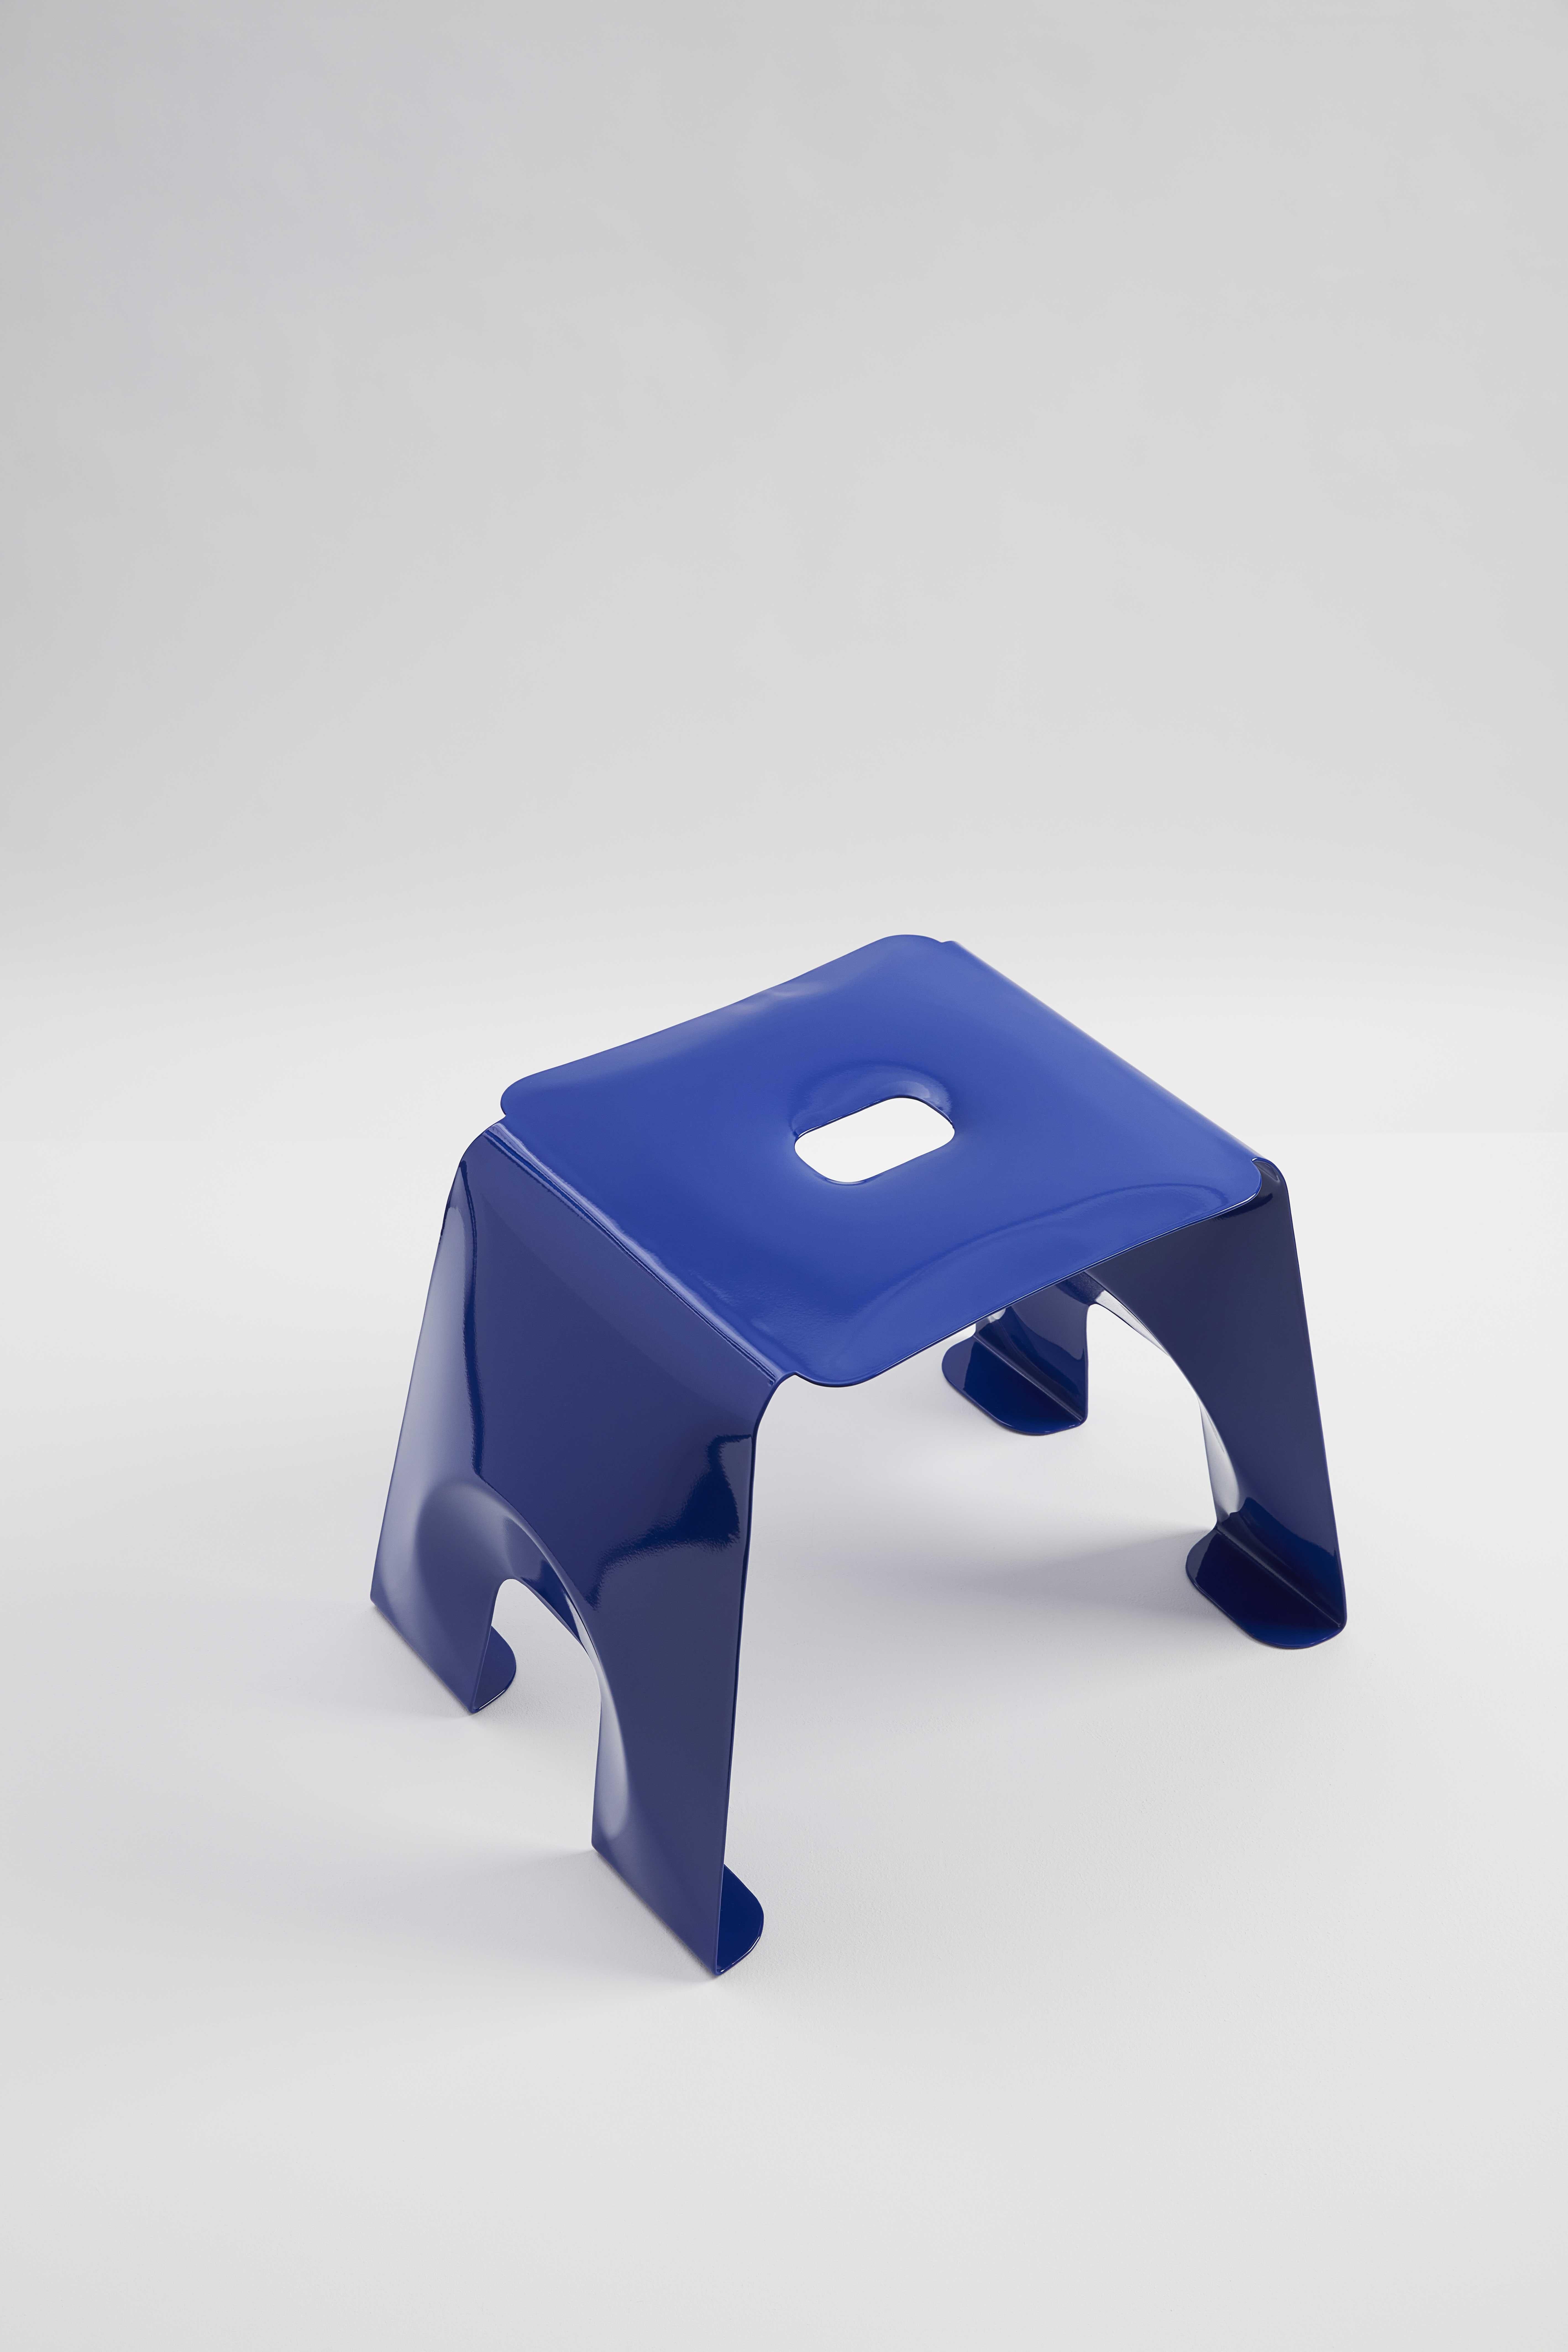 Product: A Stool
Colours: Ultramarine Blue (RAL 5003)
Materials: Powder Coated Mild Steel
Dimensions: (H) 43cm x (W) 53cm x (D) 41cm

(Stool in inflated metal).

The A Stool is a study in the process of hydroforming.

Two sheets of metal are welded